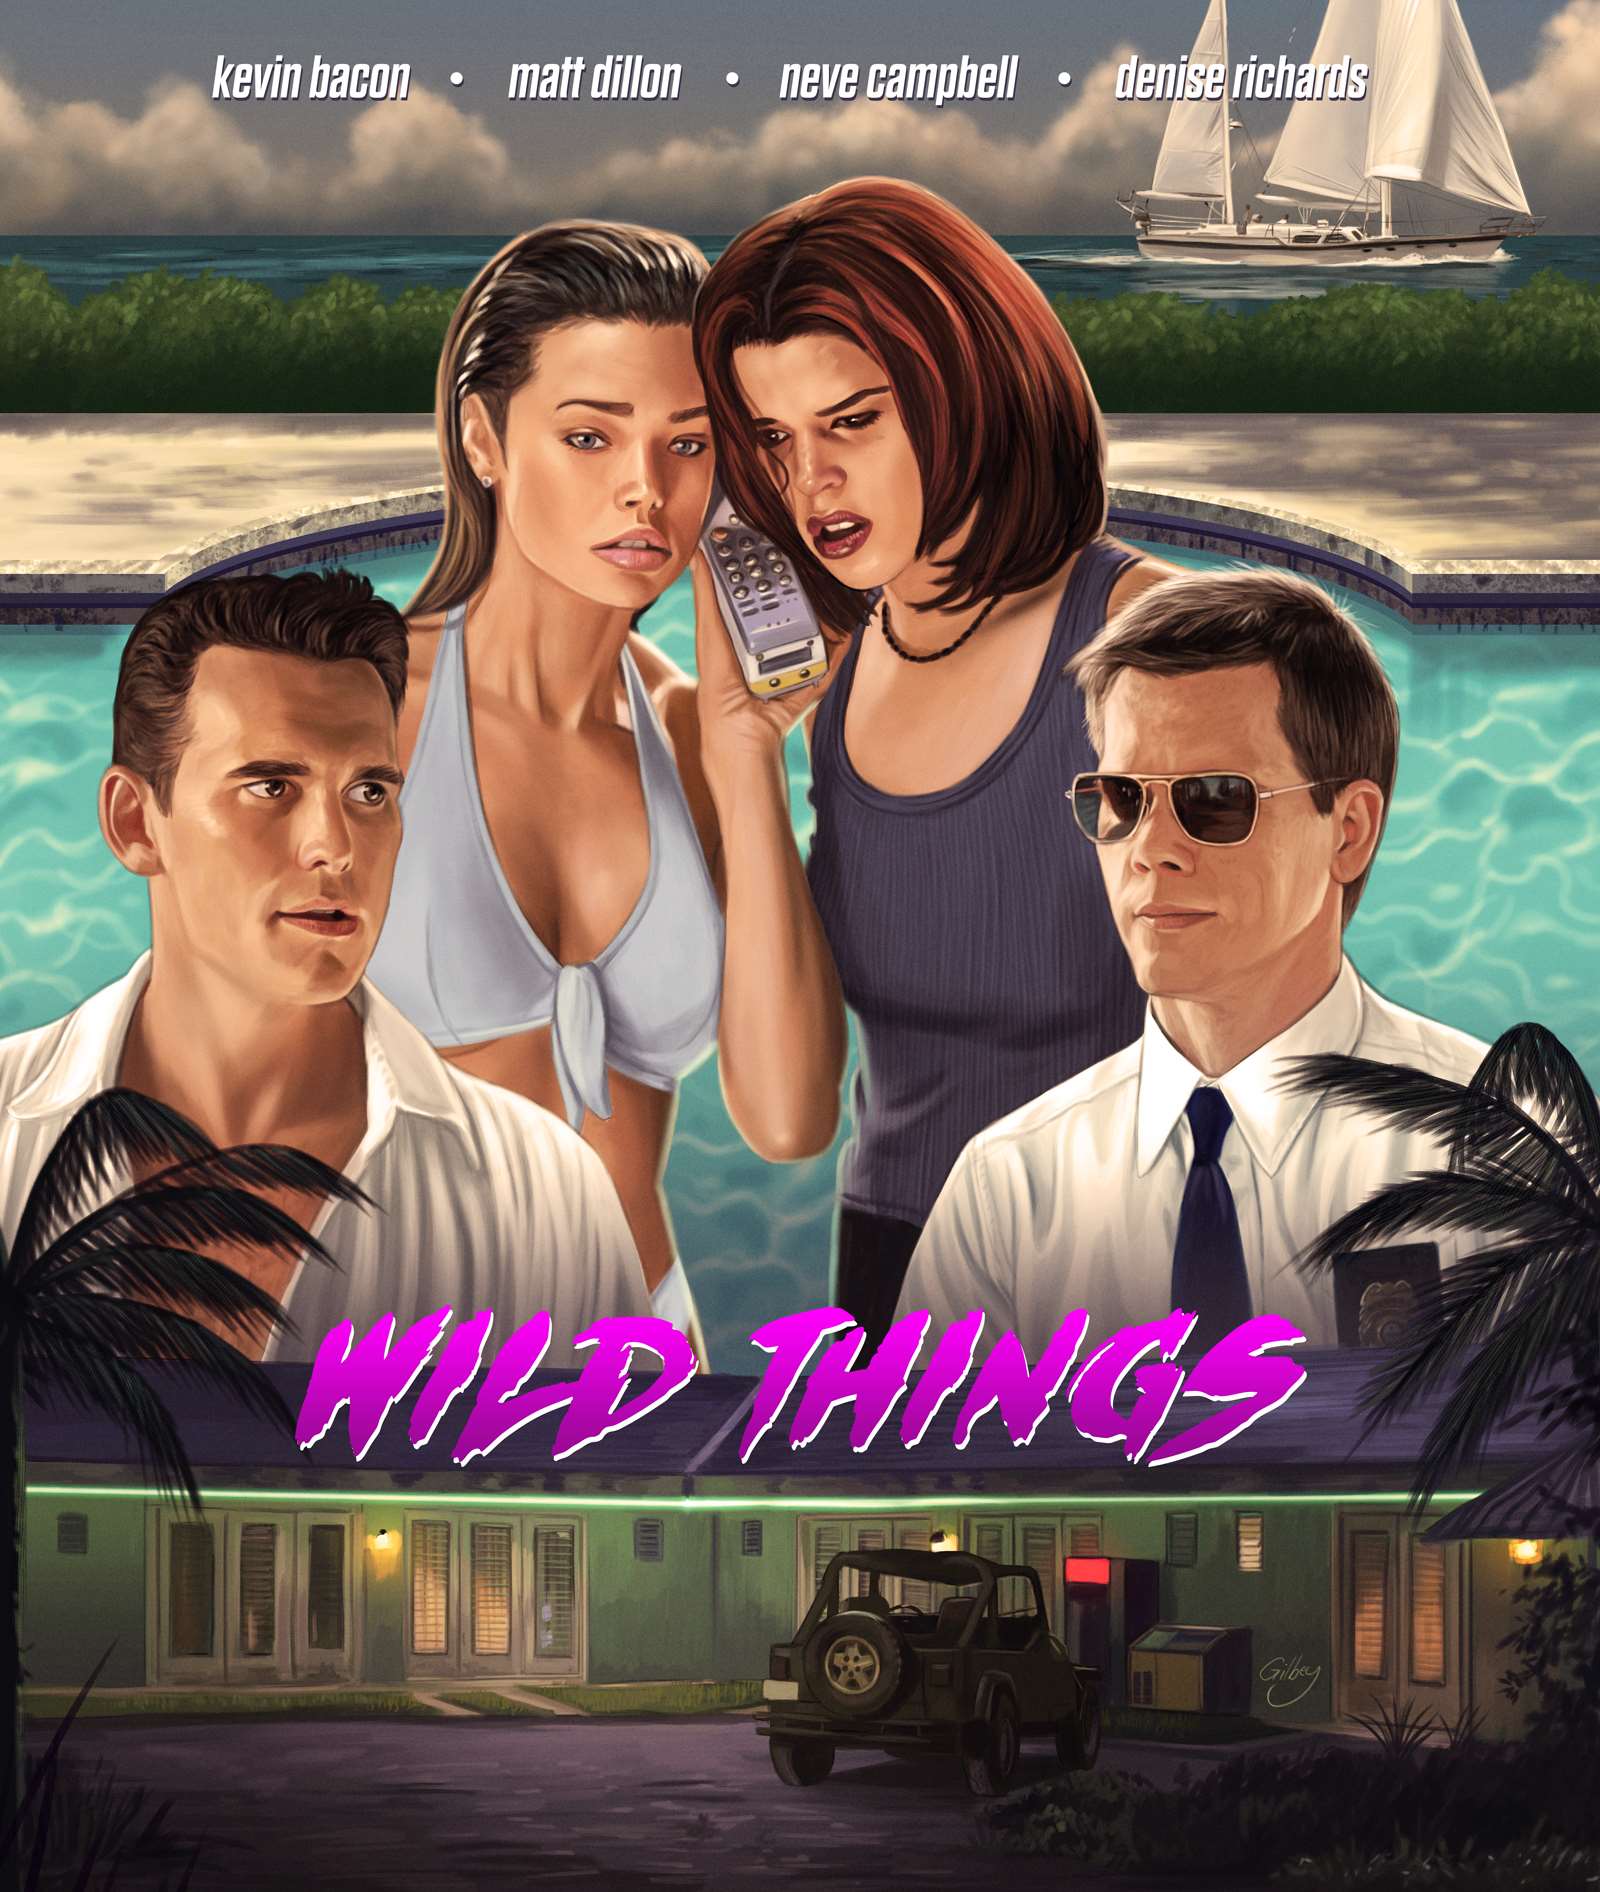 Sam  Gilbey, Cinematic painterly poster art illustration for Wild Things of 4 people in a swimming pool on the phone.  	